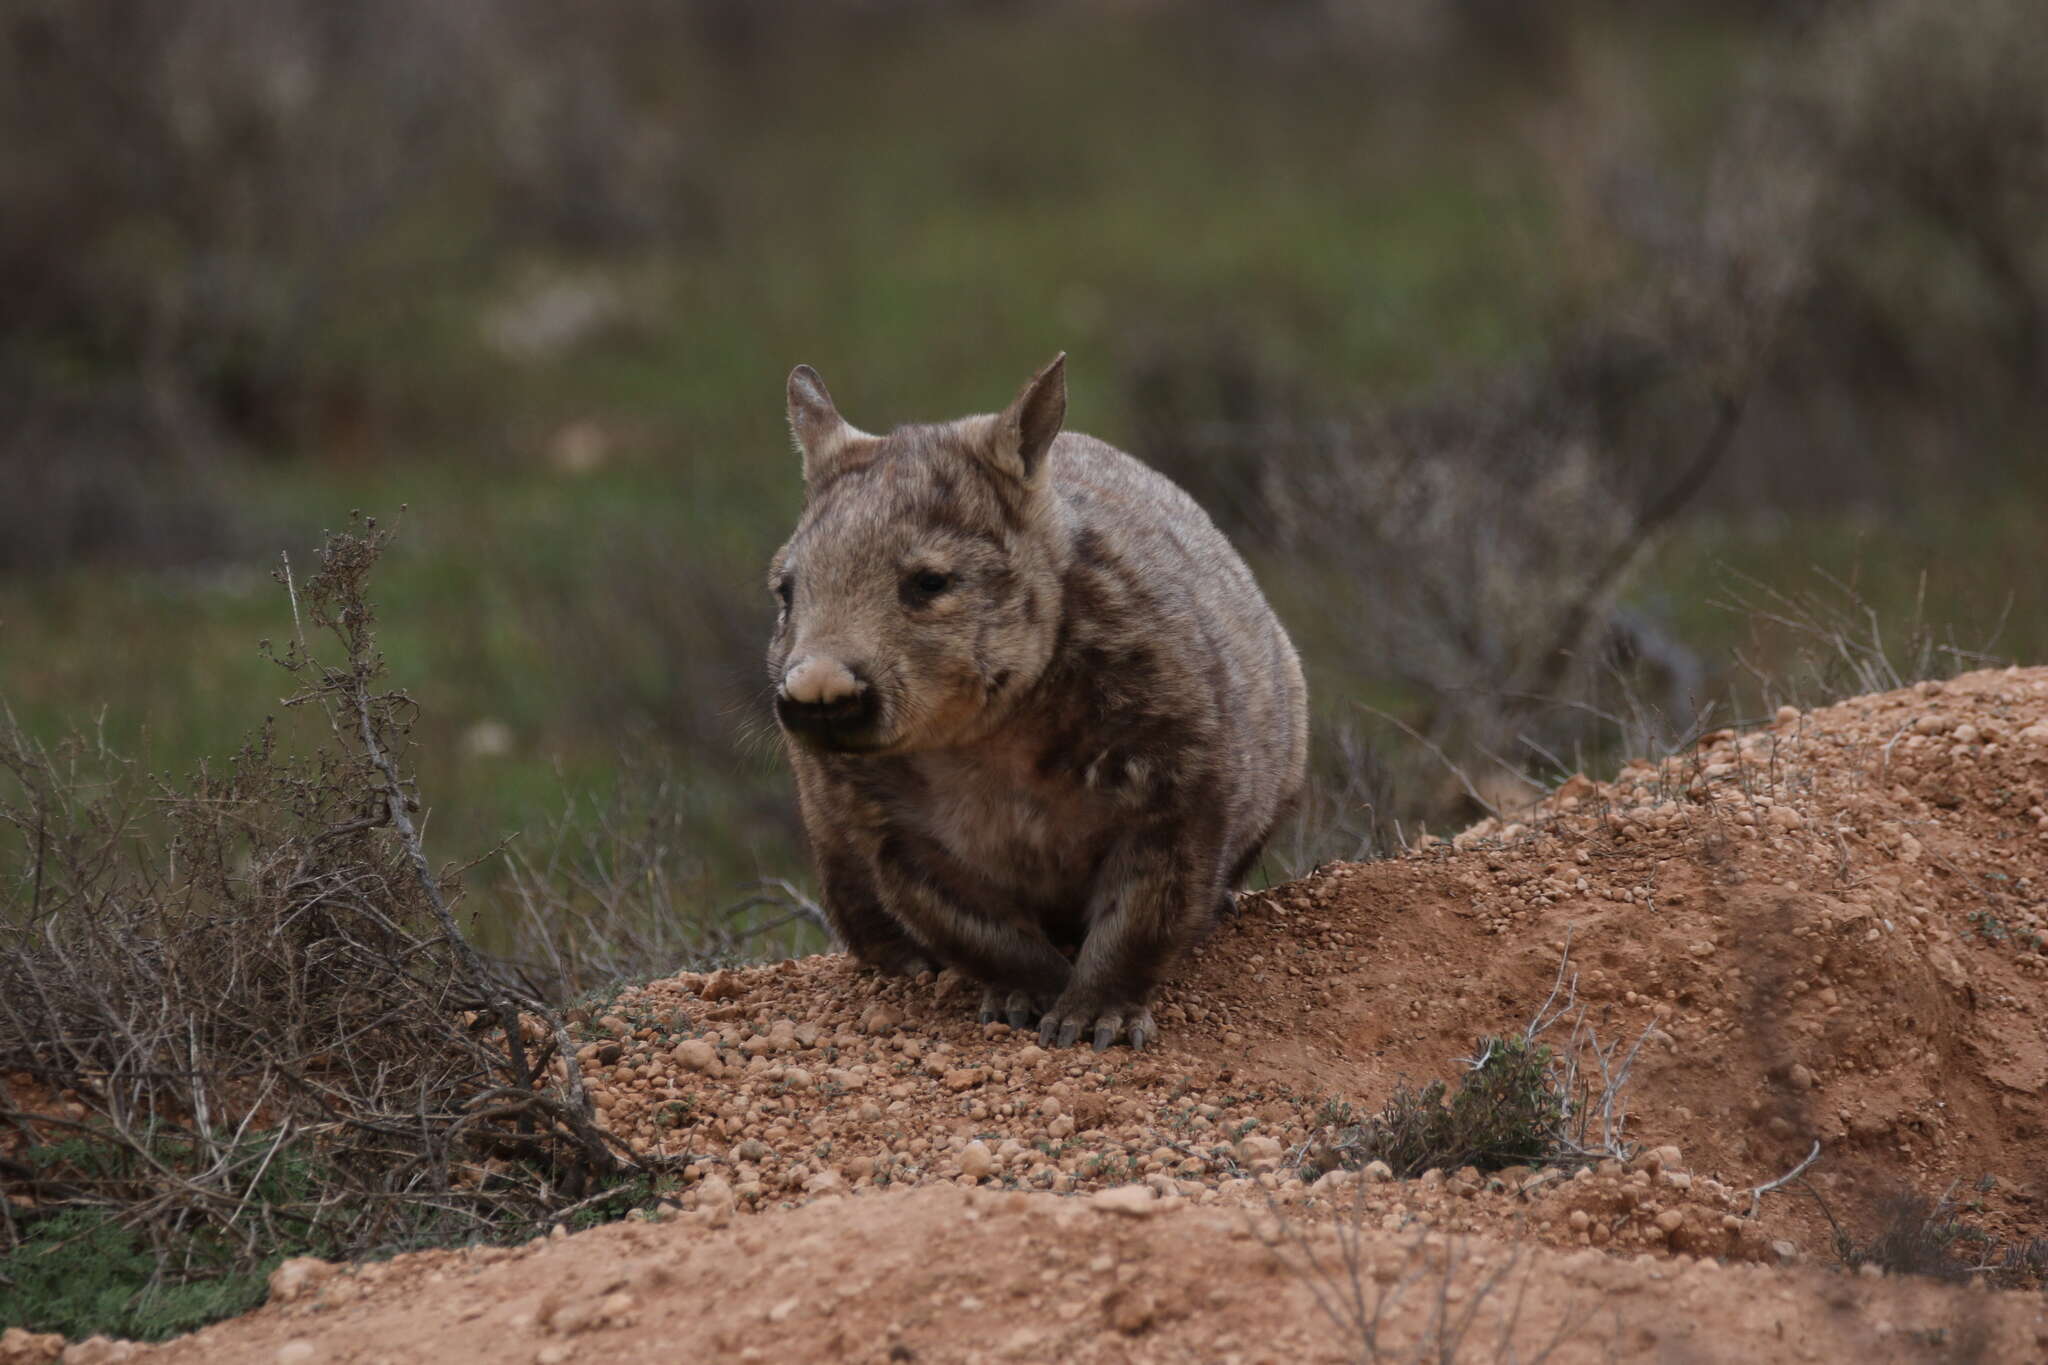 Image of hairy-nosed wombats